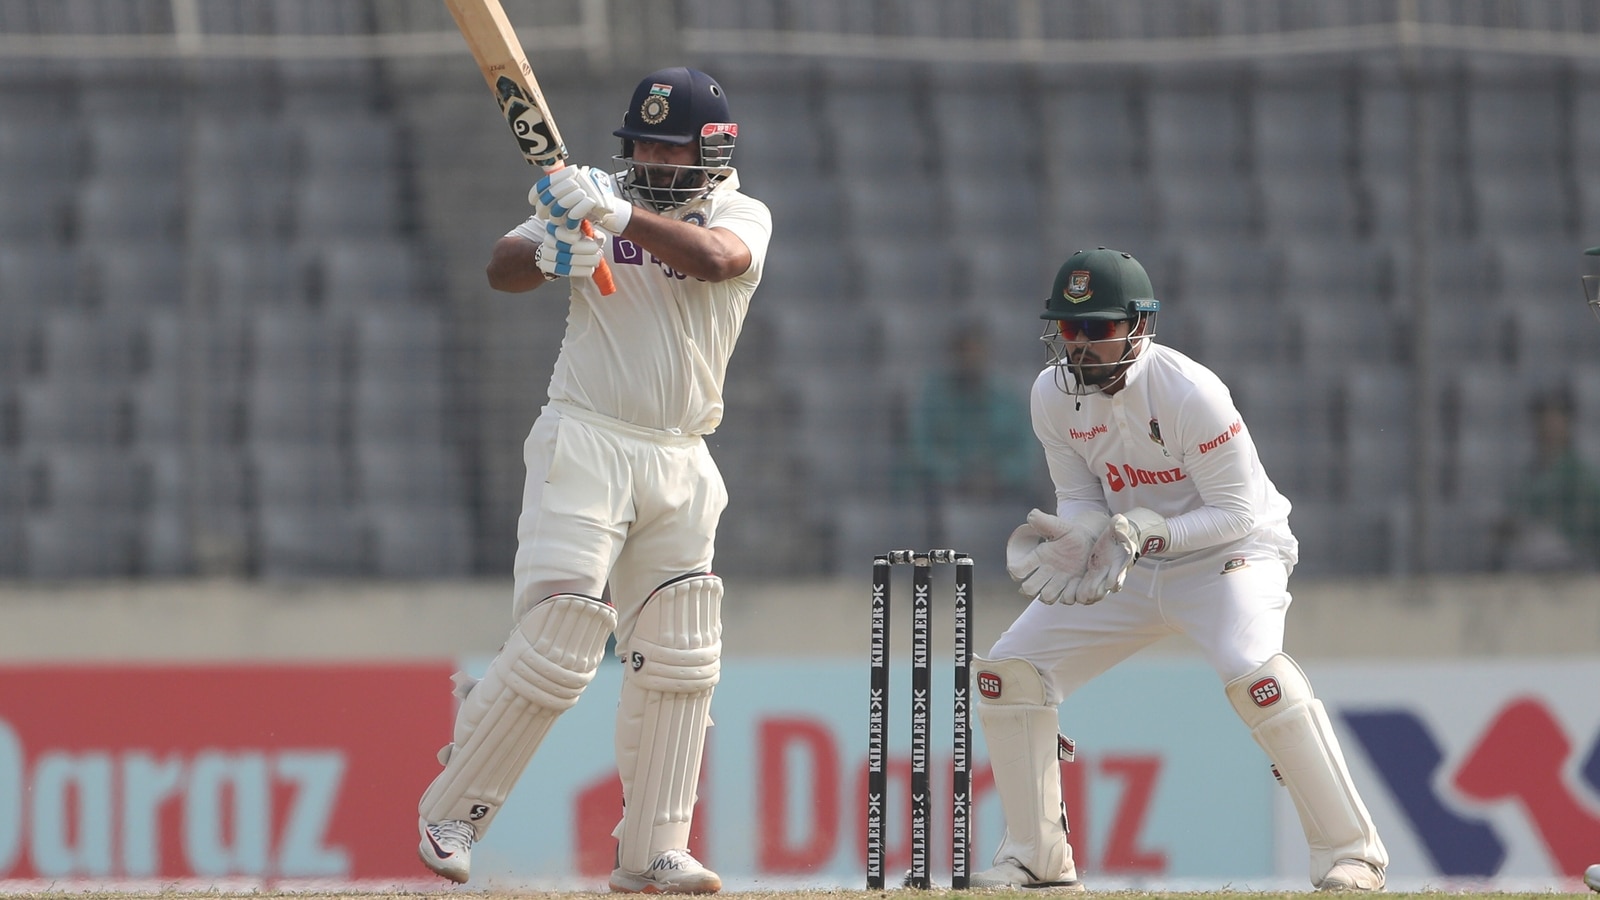 India vs Bangladesh 2nd Test Day 2 highlights Pant and Iyer help IND finish Day 2 with 80-run lead Hindustan Times